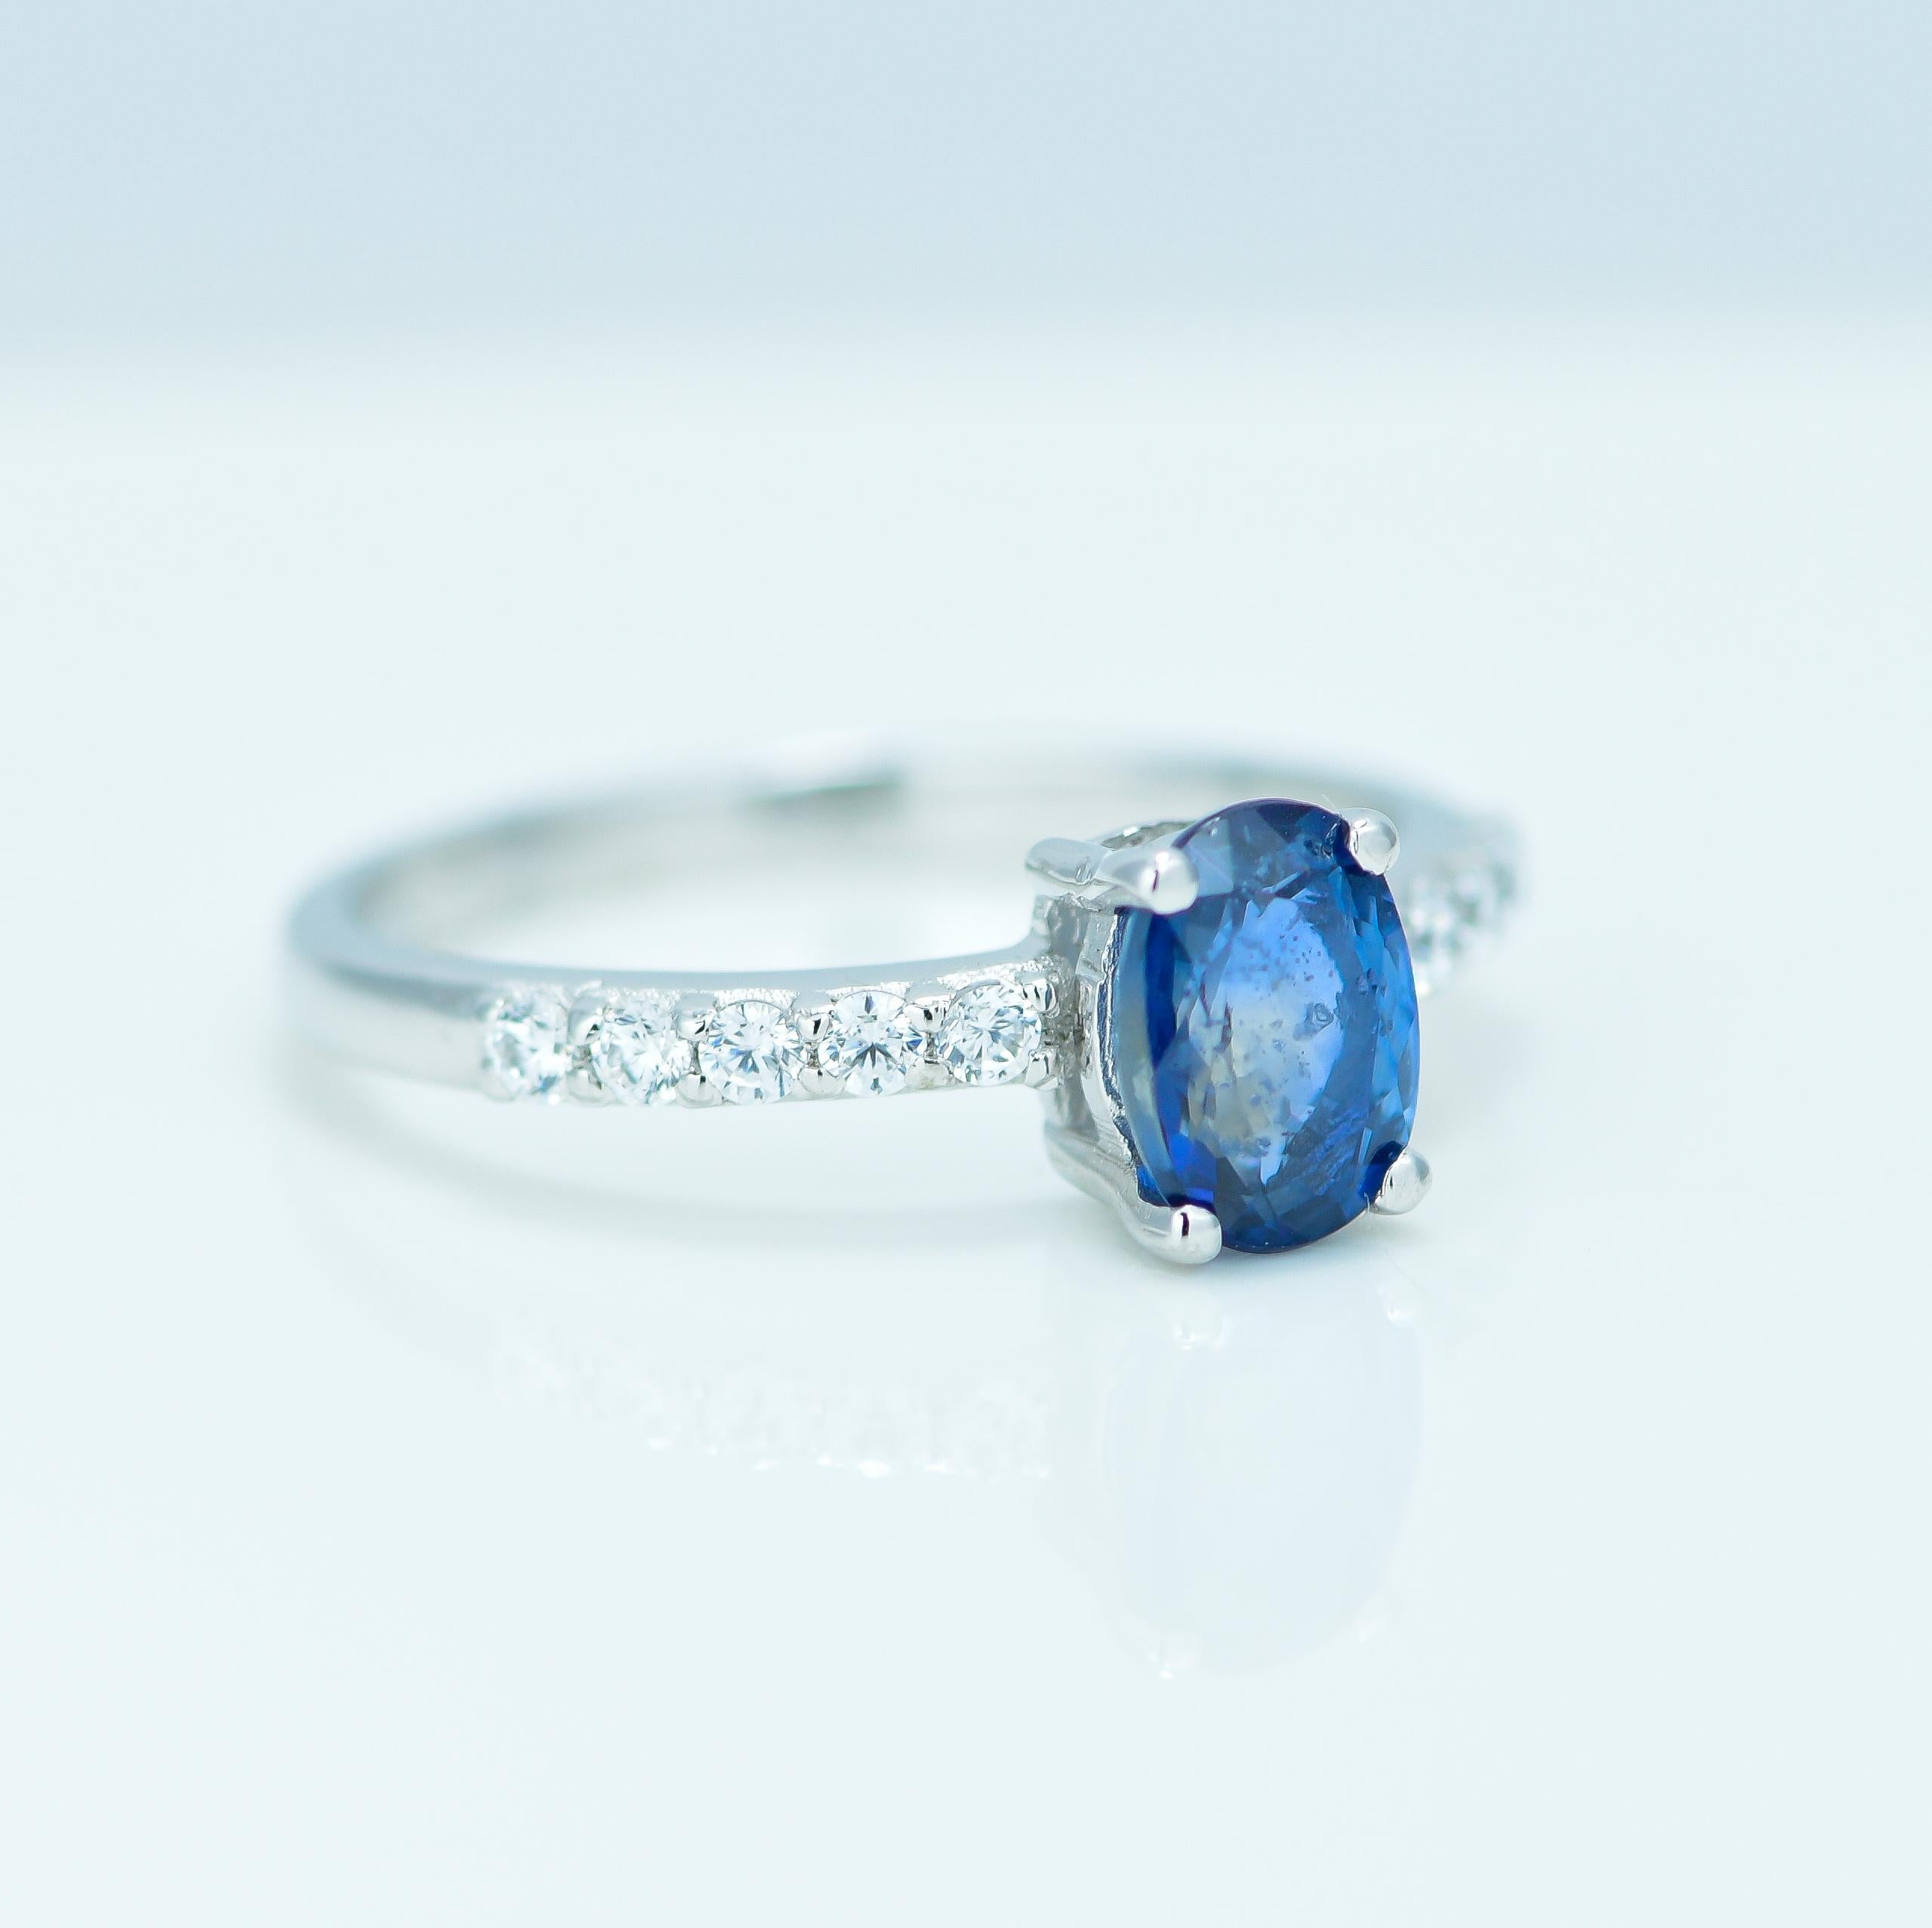 A beautifully designed Natural Blue Sapphire silver ring, 

Specifications 

Ring metal - 925 Silver
Ring Size - 6 US

Centre stone type - Natural Blue Sapphire
Centre stone size - 7.2 X 5.2 mm (Approx.)
Centre stone weight - 1 ct (Approx)
Centre